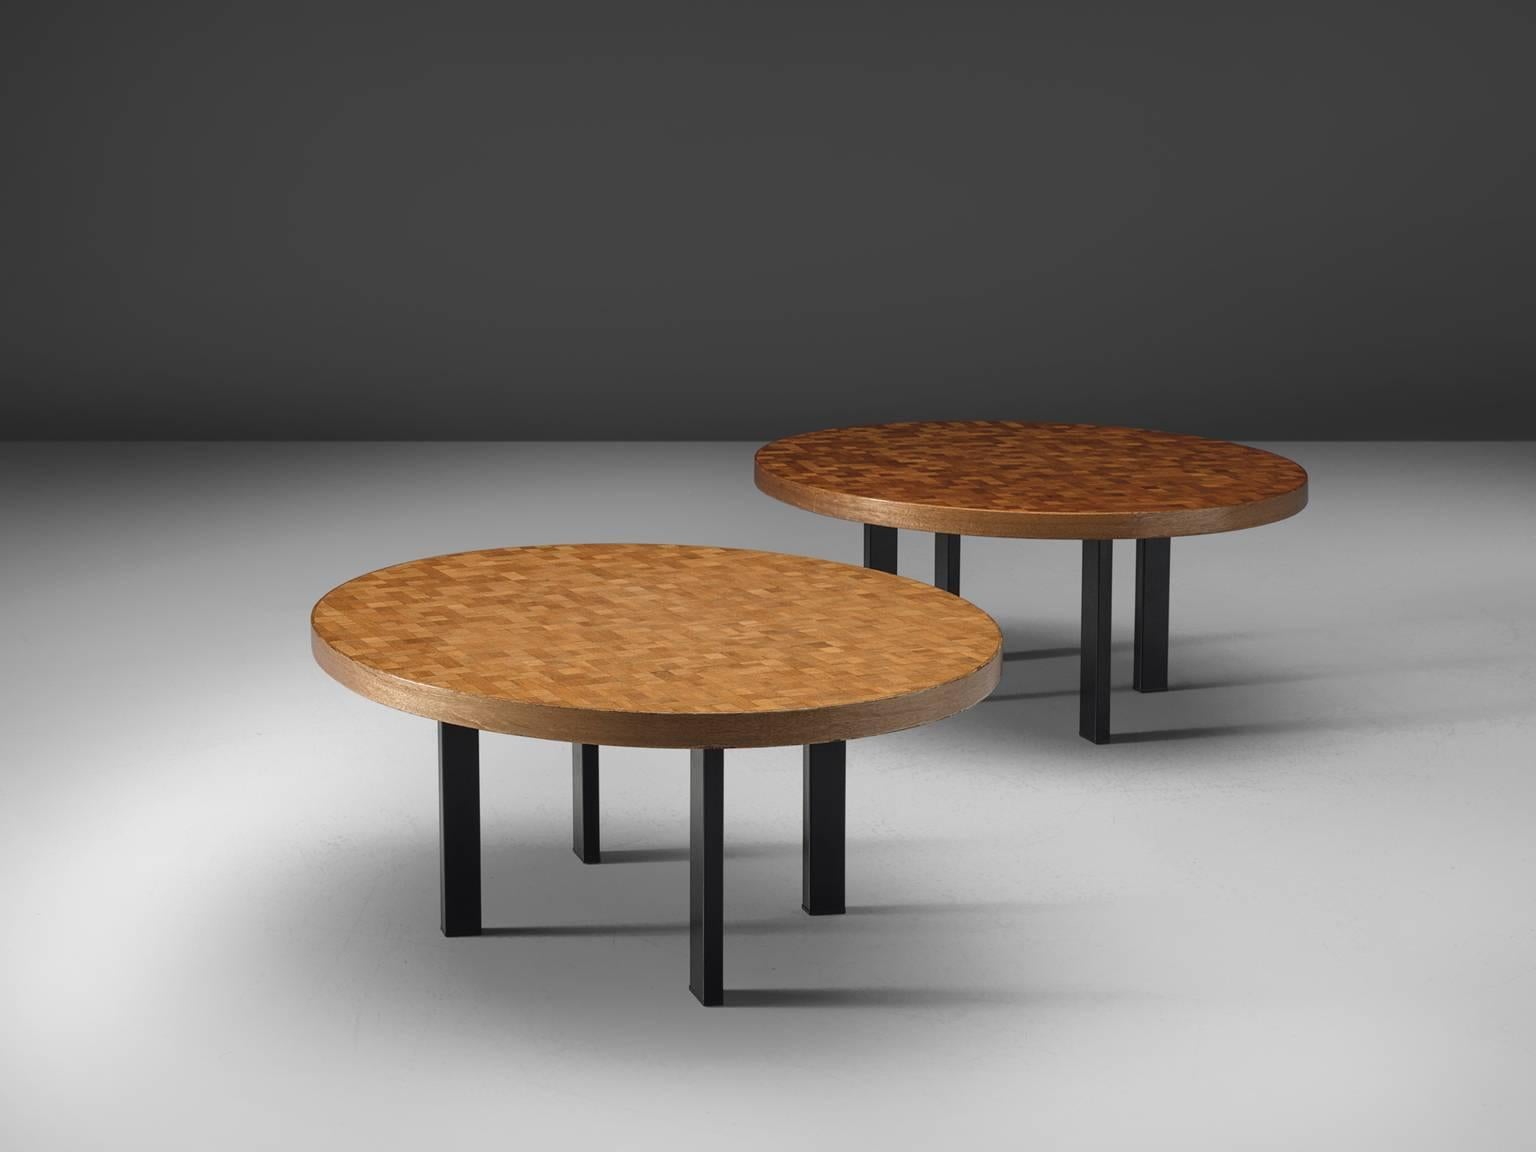 Dieter Waeckerlin for Idealheim, teak, steel, Switzerland, 1960s

This set of side tables is designed by Dieter Waeckerlin for Idealheim. The table features clean lines and a balanced, sleek combination of the end grain wooden combined with the